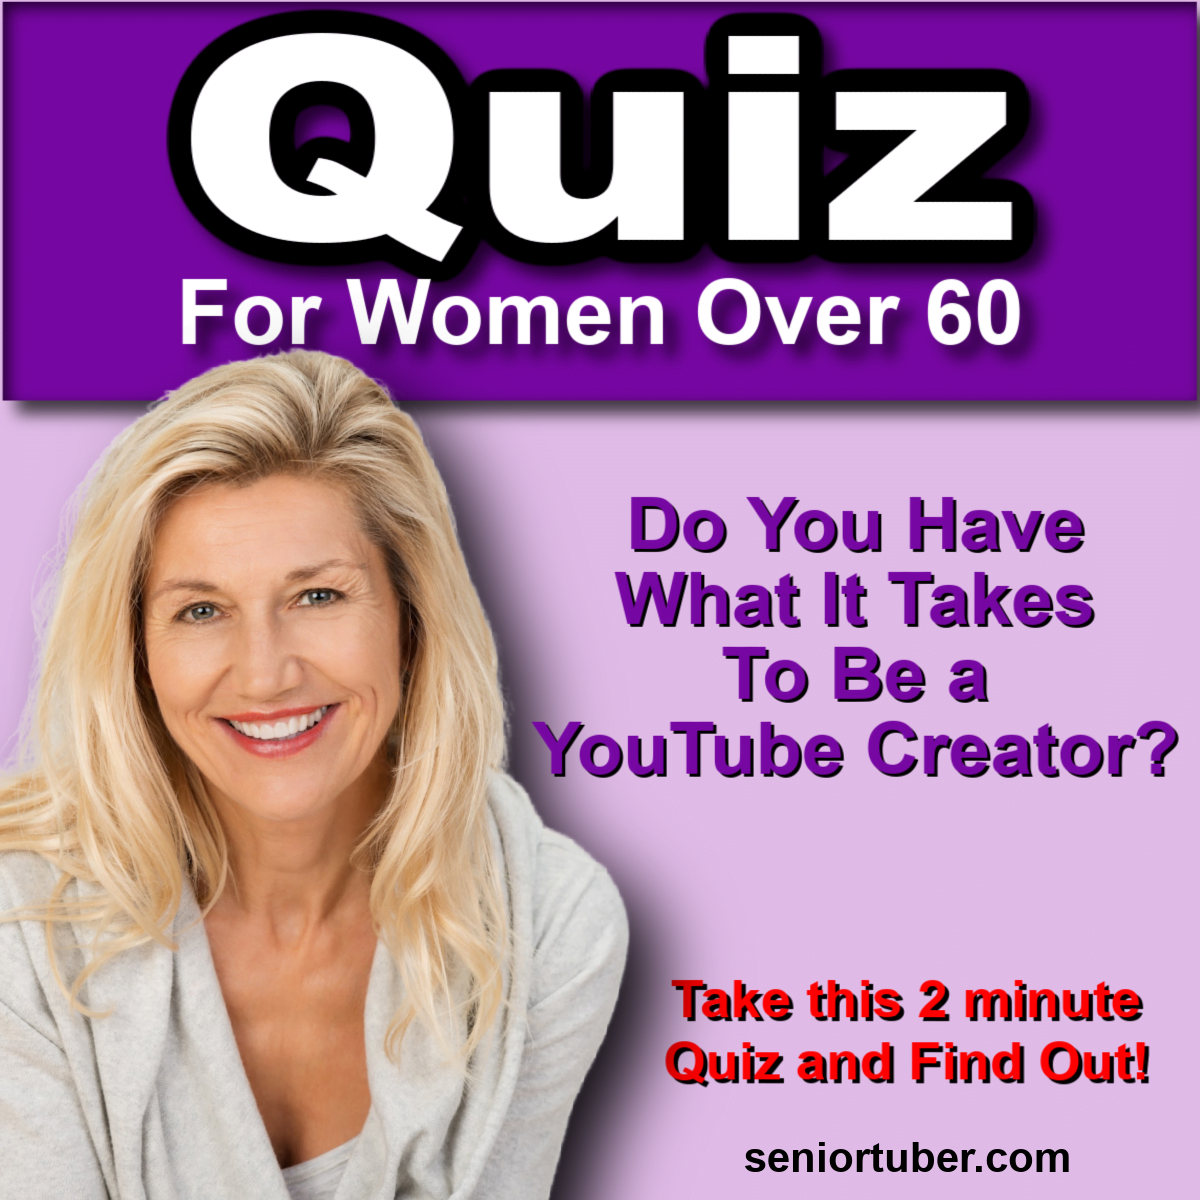 Quiz Do You Have What It Takes To Be a YouTube Creator? Thive Anyway Seniortuber.com